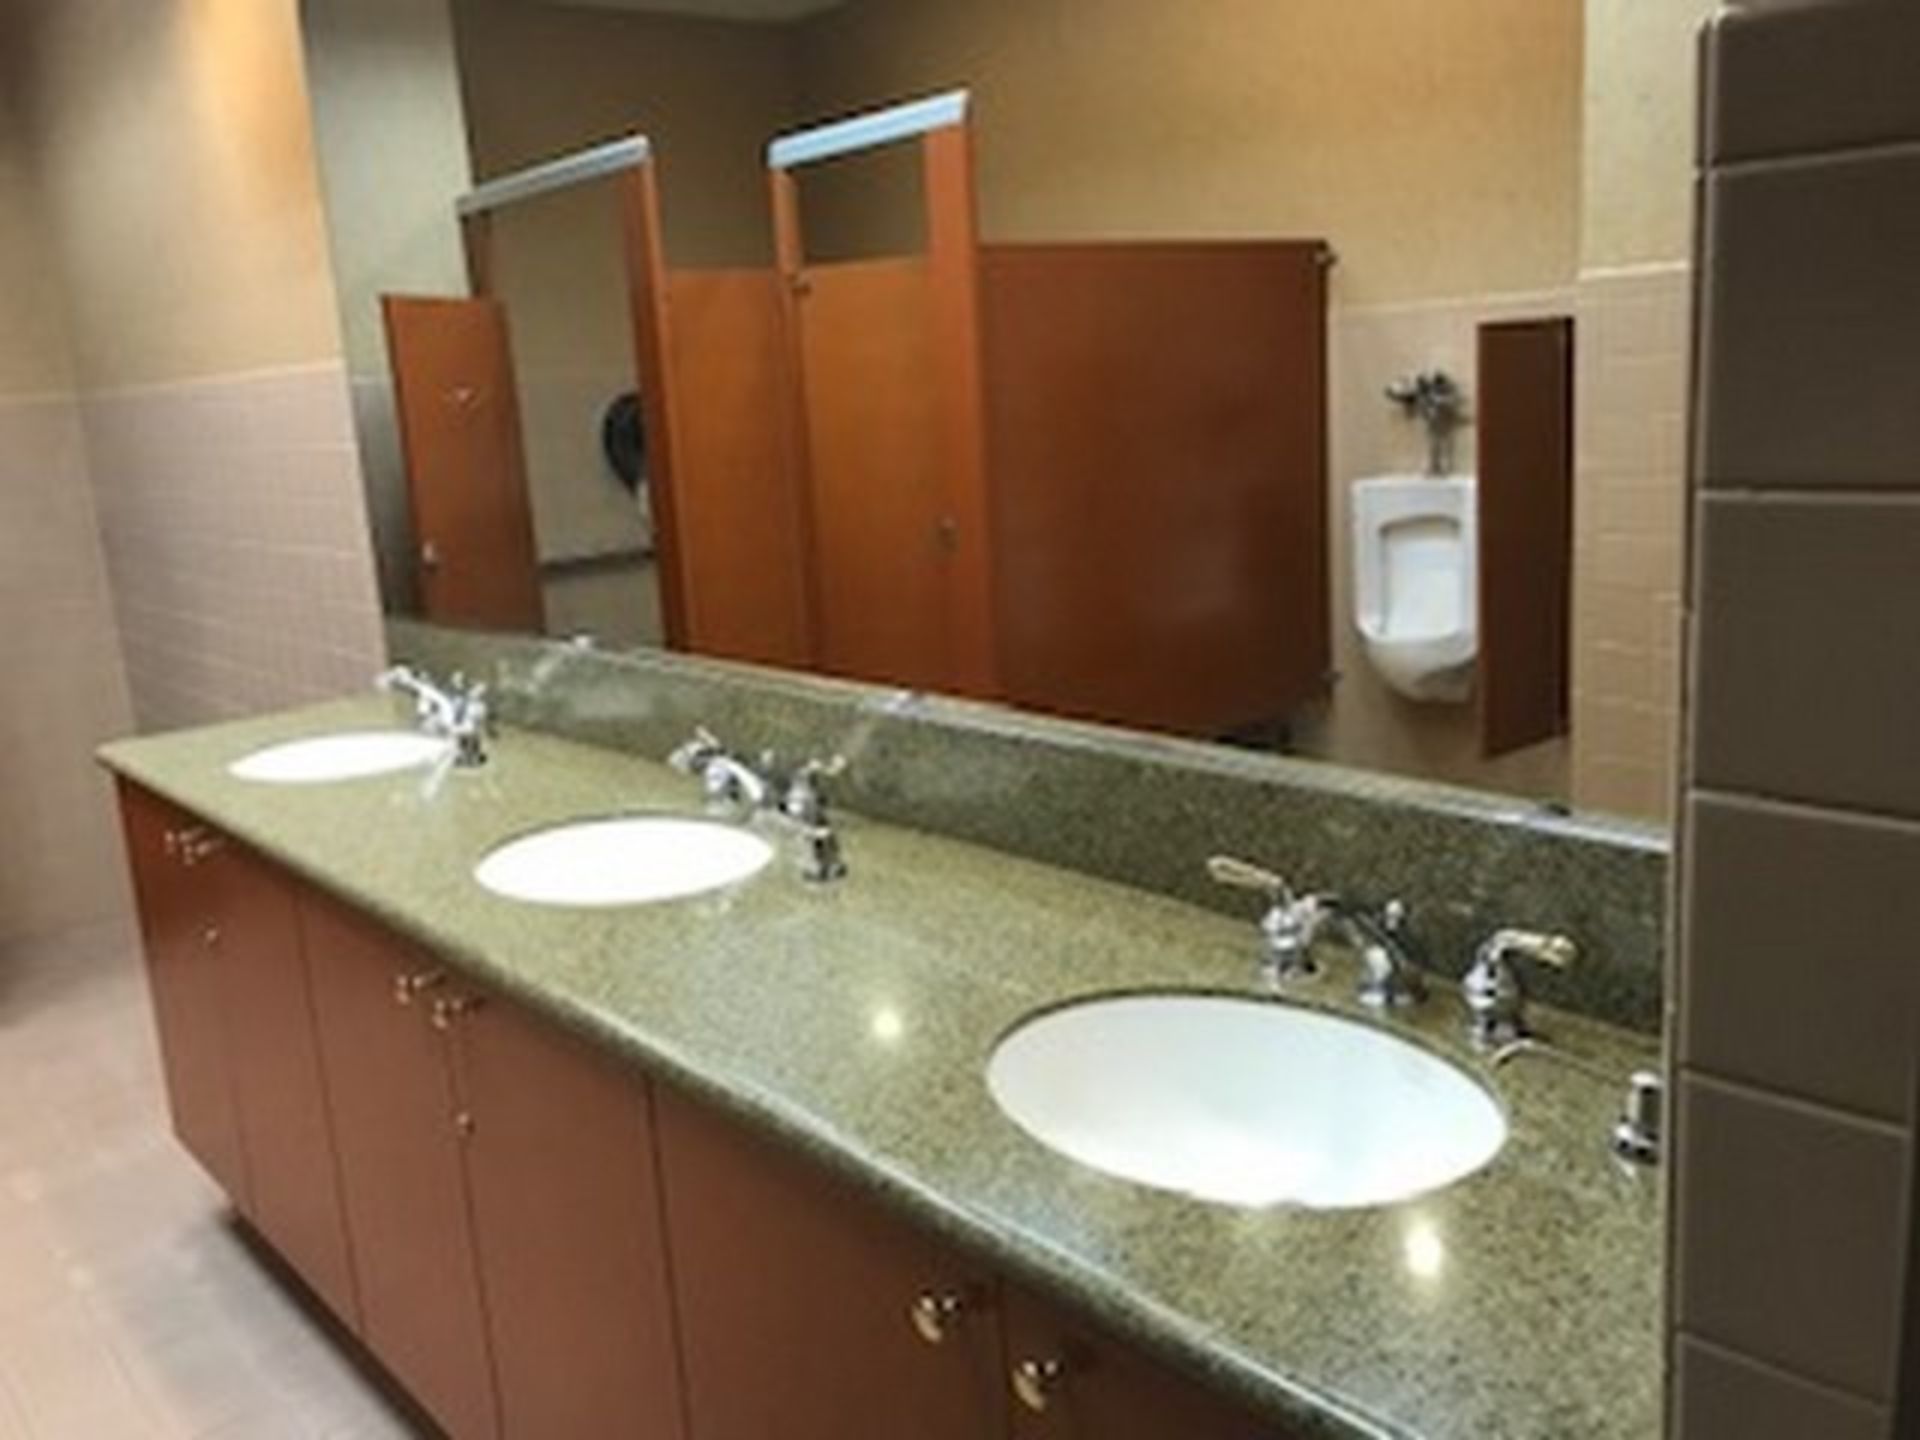 LOT MENS LAVATORY CONTENTS - URINALS, COMMODES, SINKS, COUNTERS, ETC - Image 2 of 3